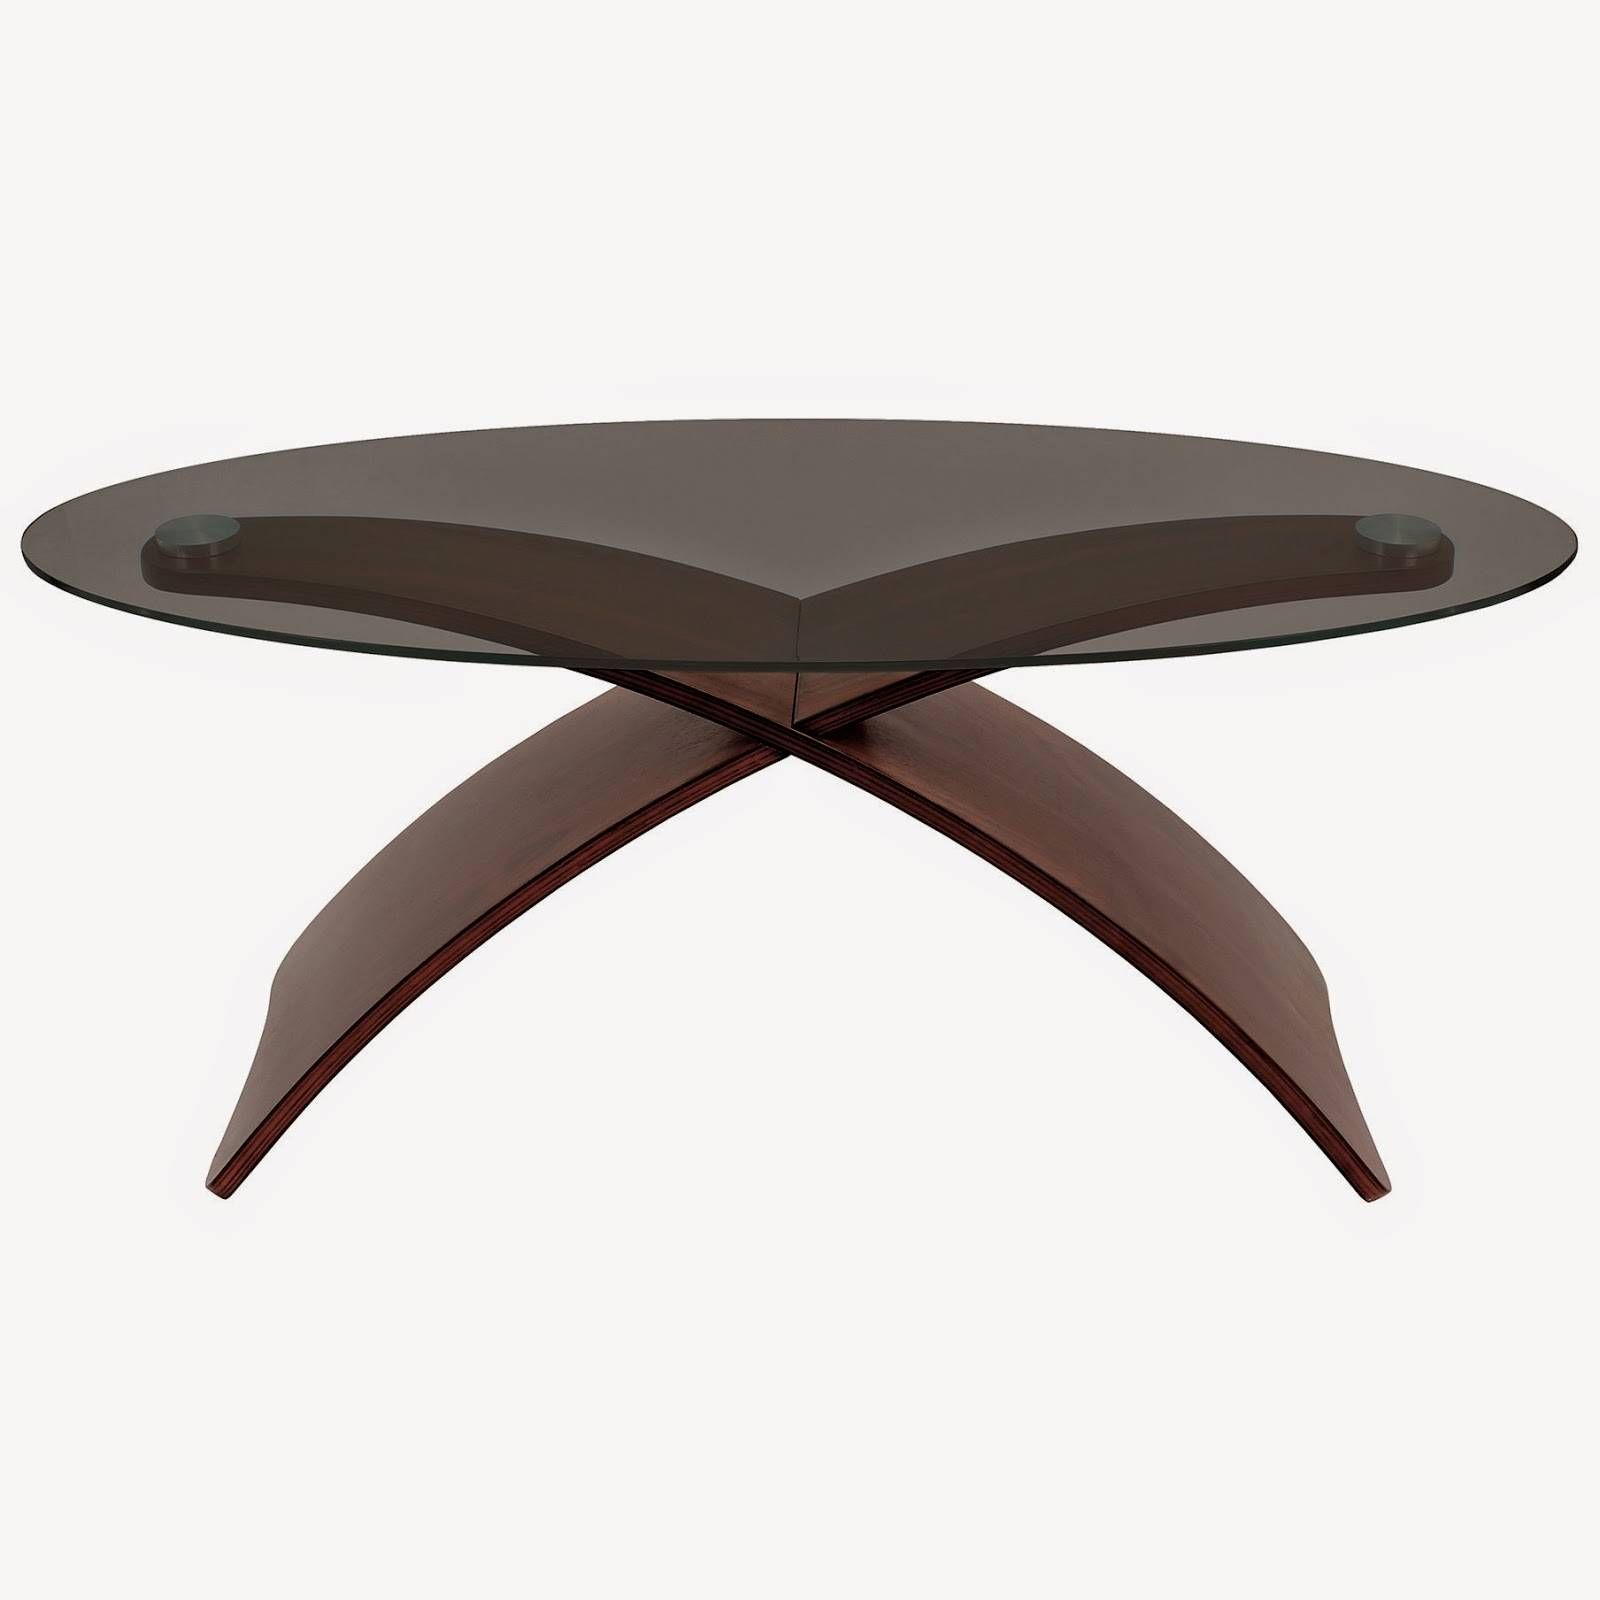 25 Elegant Oval Coffee Table Designs Made Of Glass And Wood Regarding Oval Glass Coffee Tables (View 25 of 30)